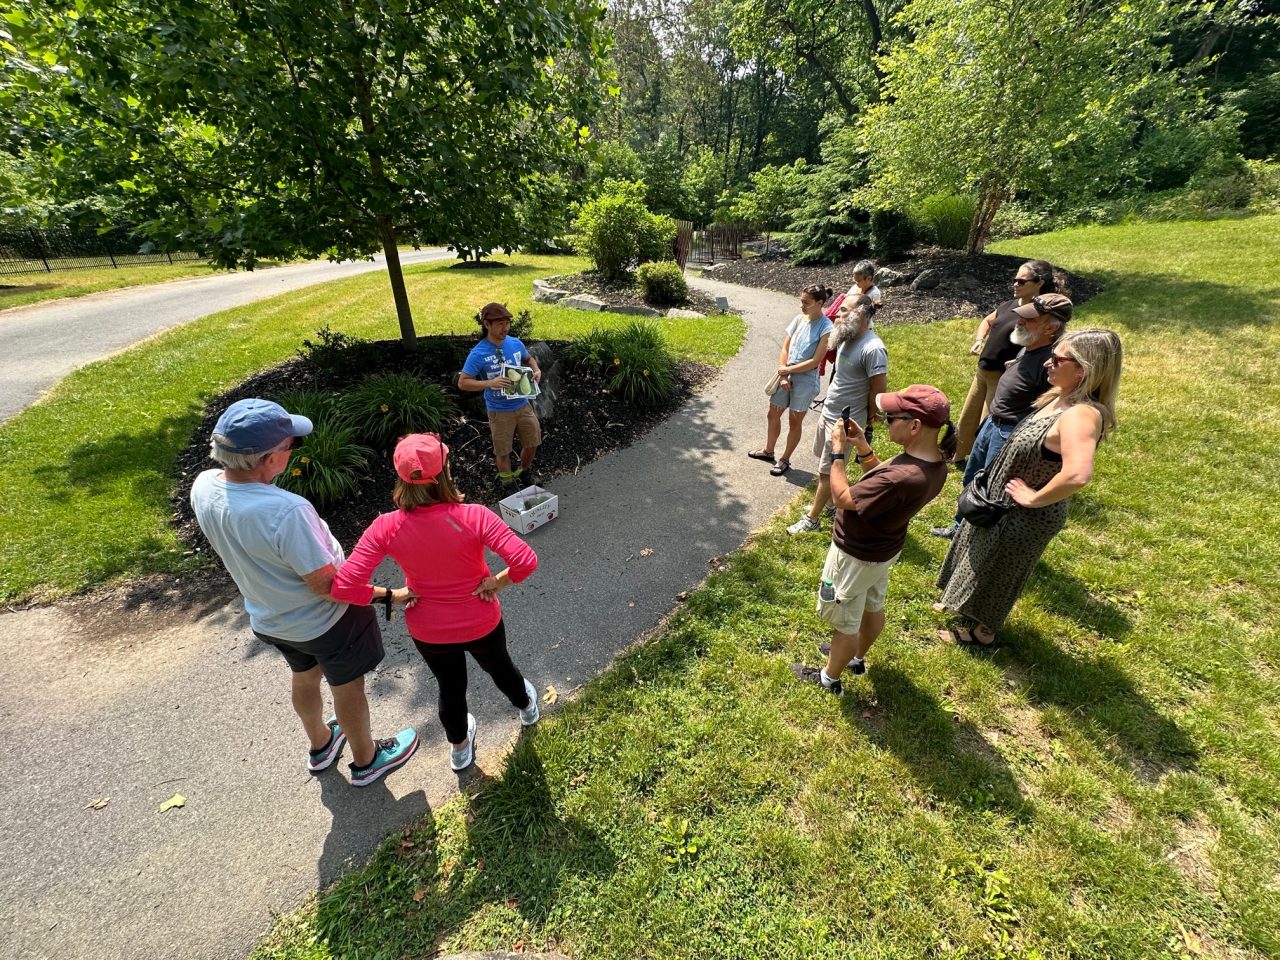 A group of nine people listen to Philip Chung discuss paw paw fruit during a recent event on the Karl Stirner Arts Trail in Easton, Pennsylvania.